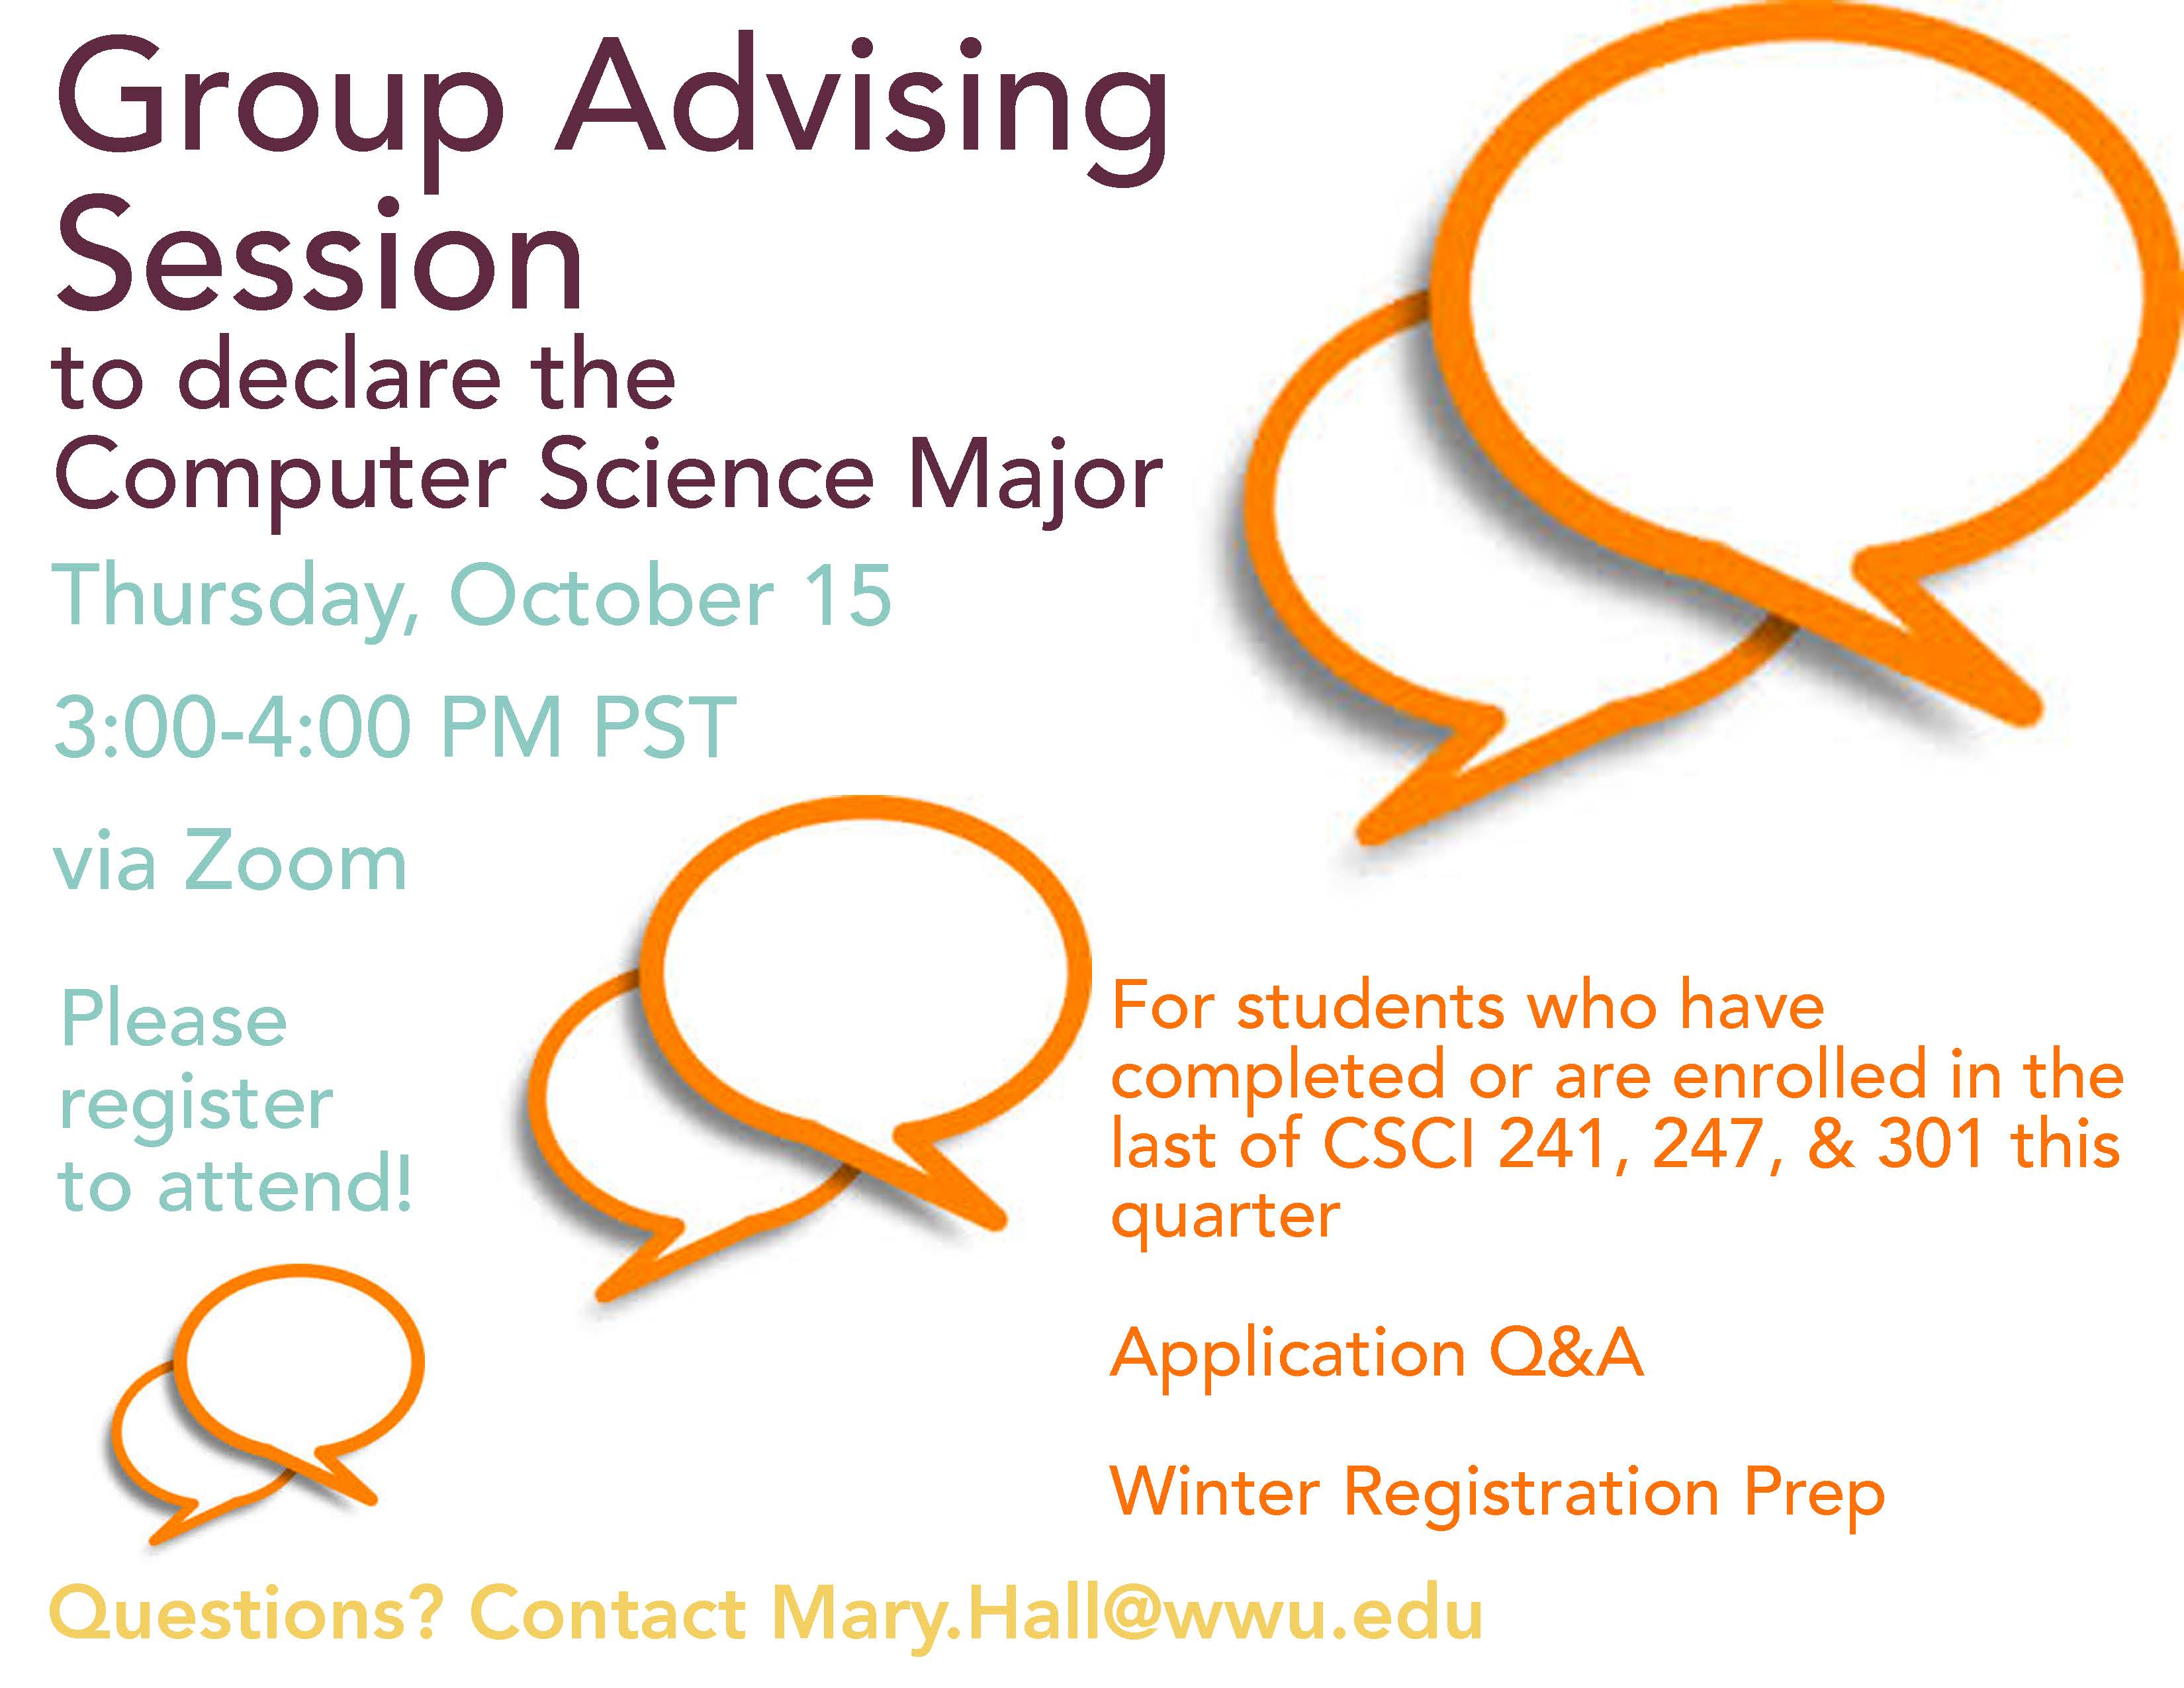 Poster for Group Advising Session to Declare the CS Major